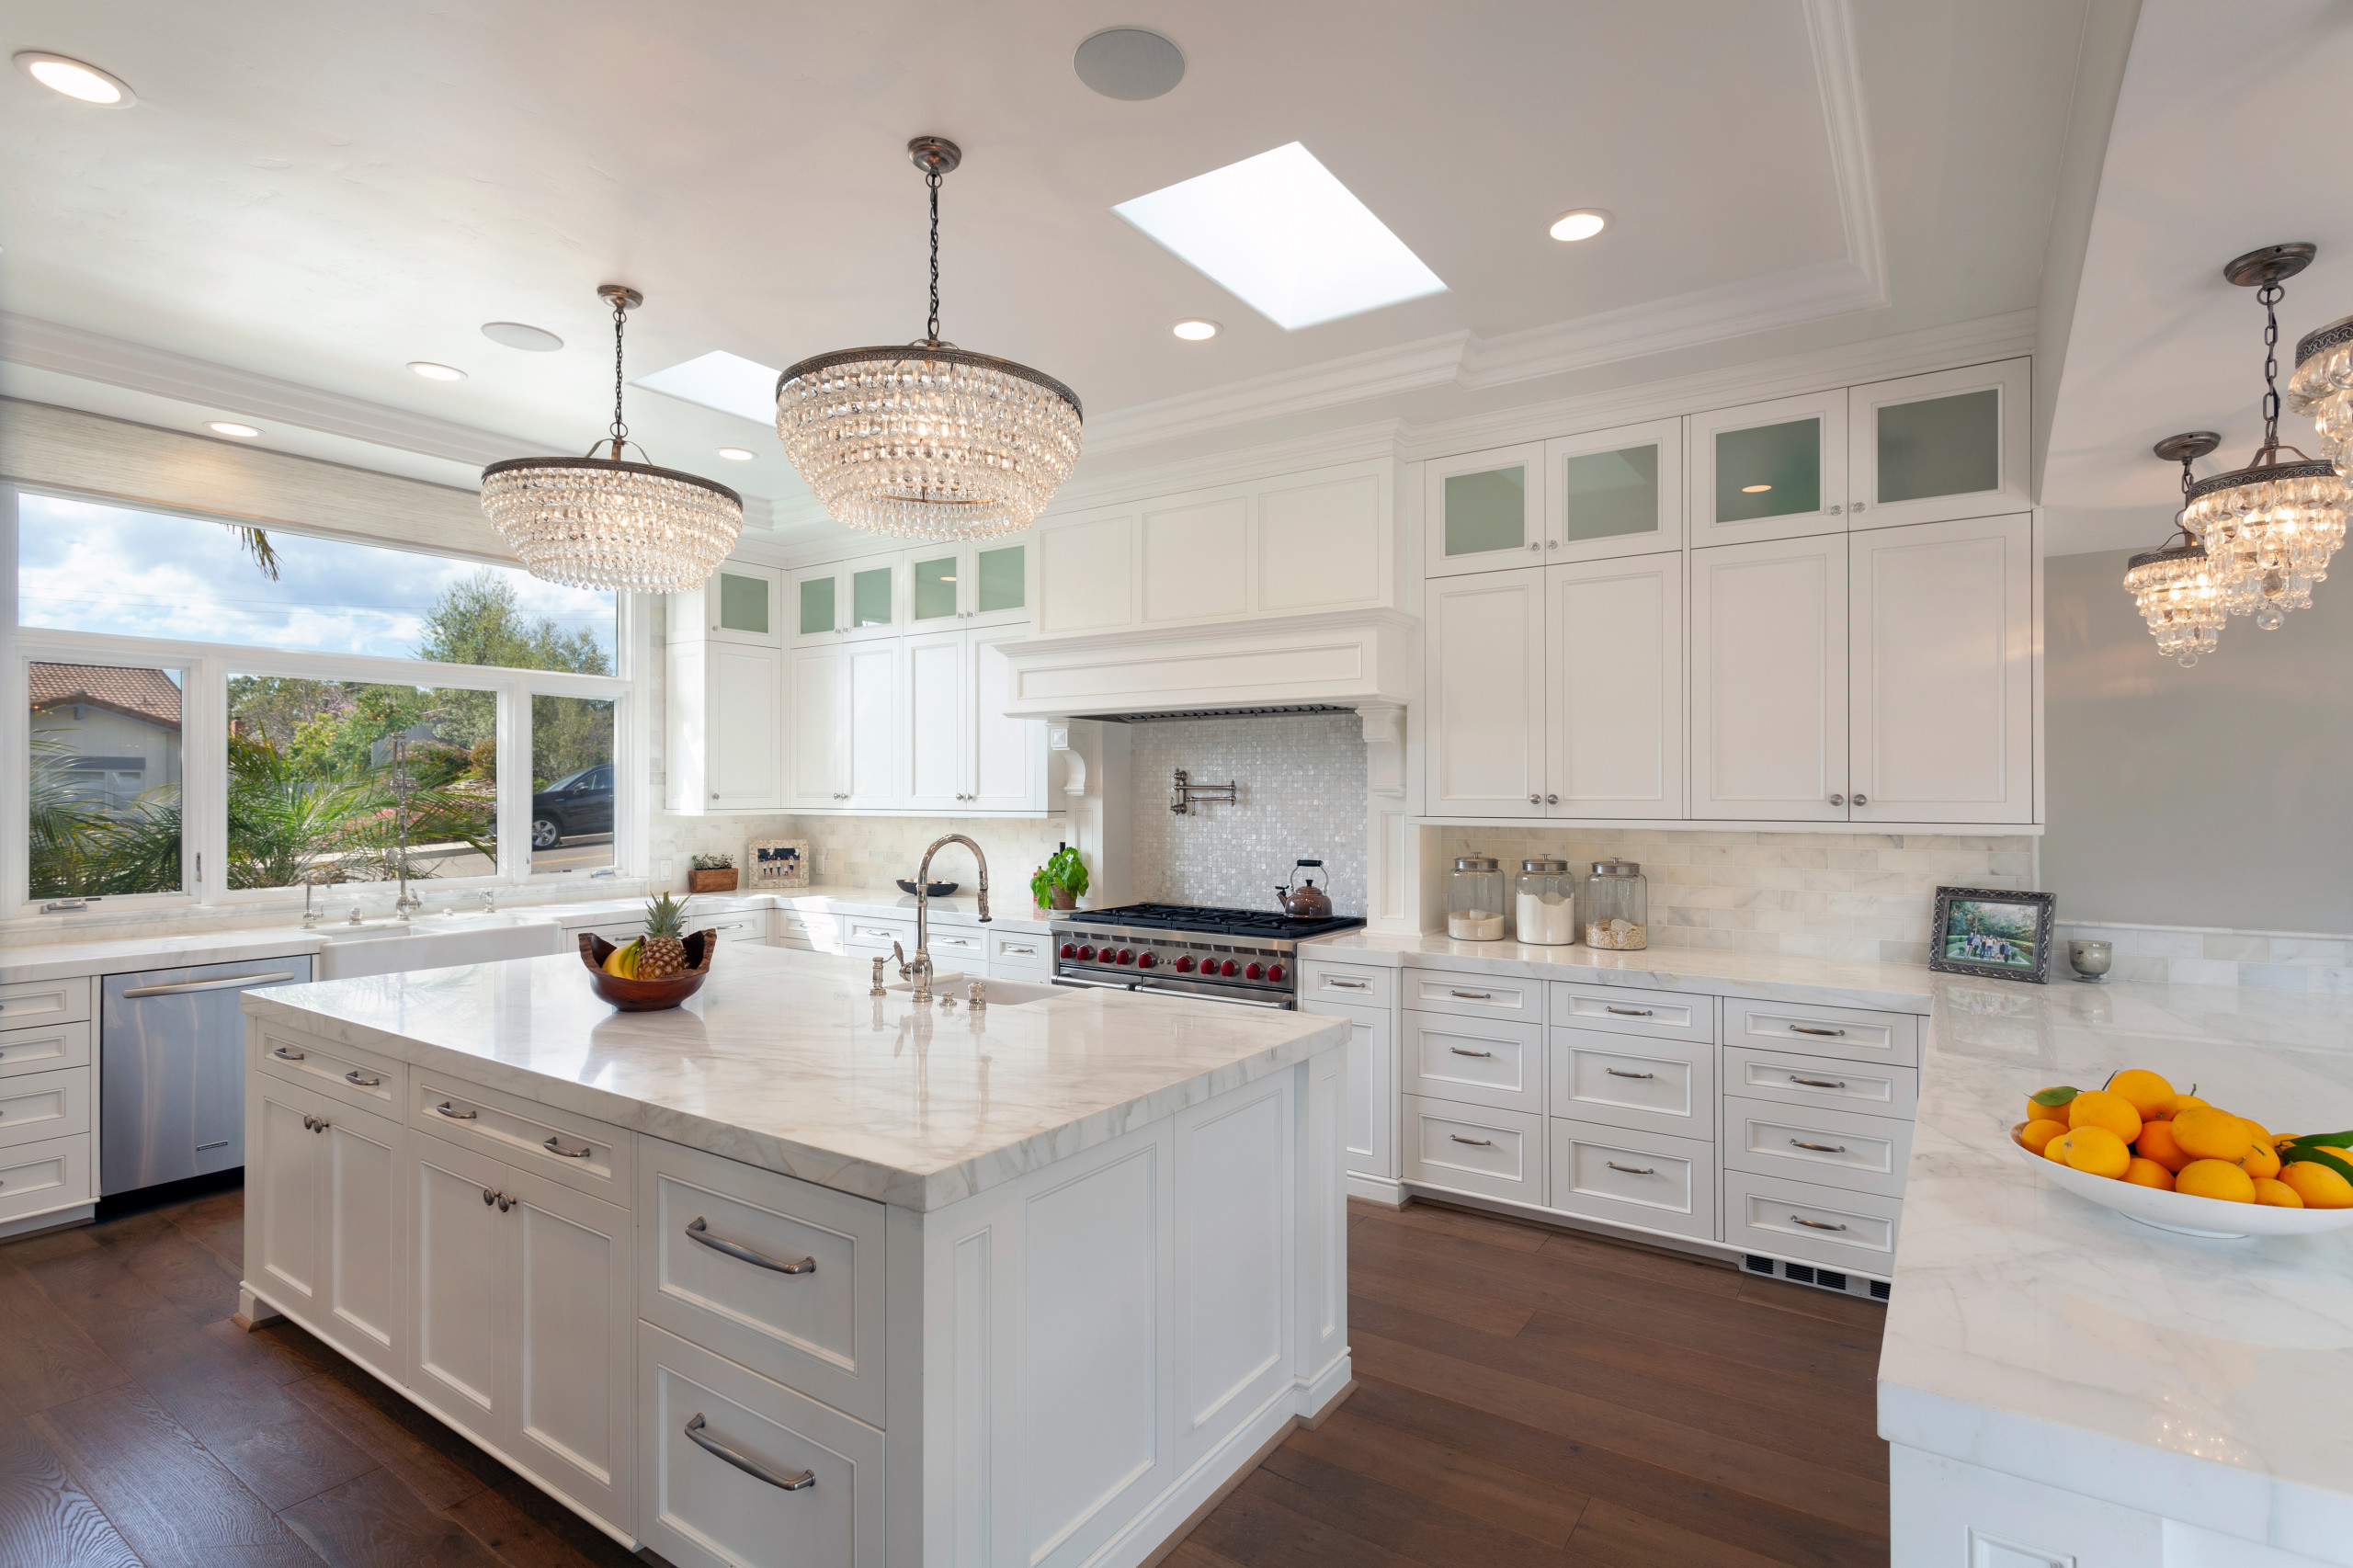 18 Beautiful White Kitchen Cabinets Pictures & Ideas   Houzz